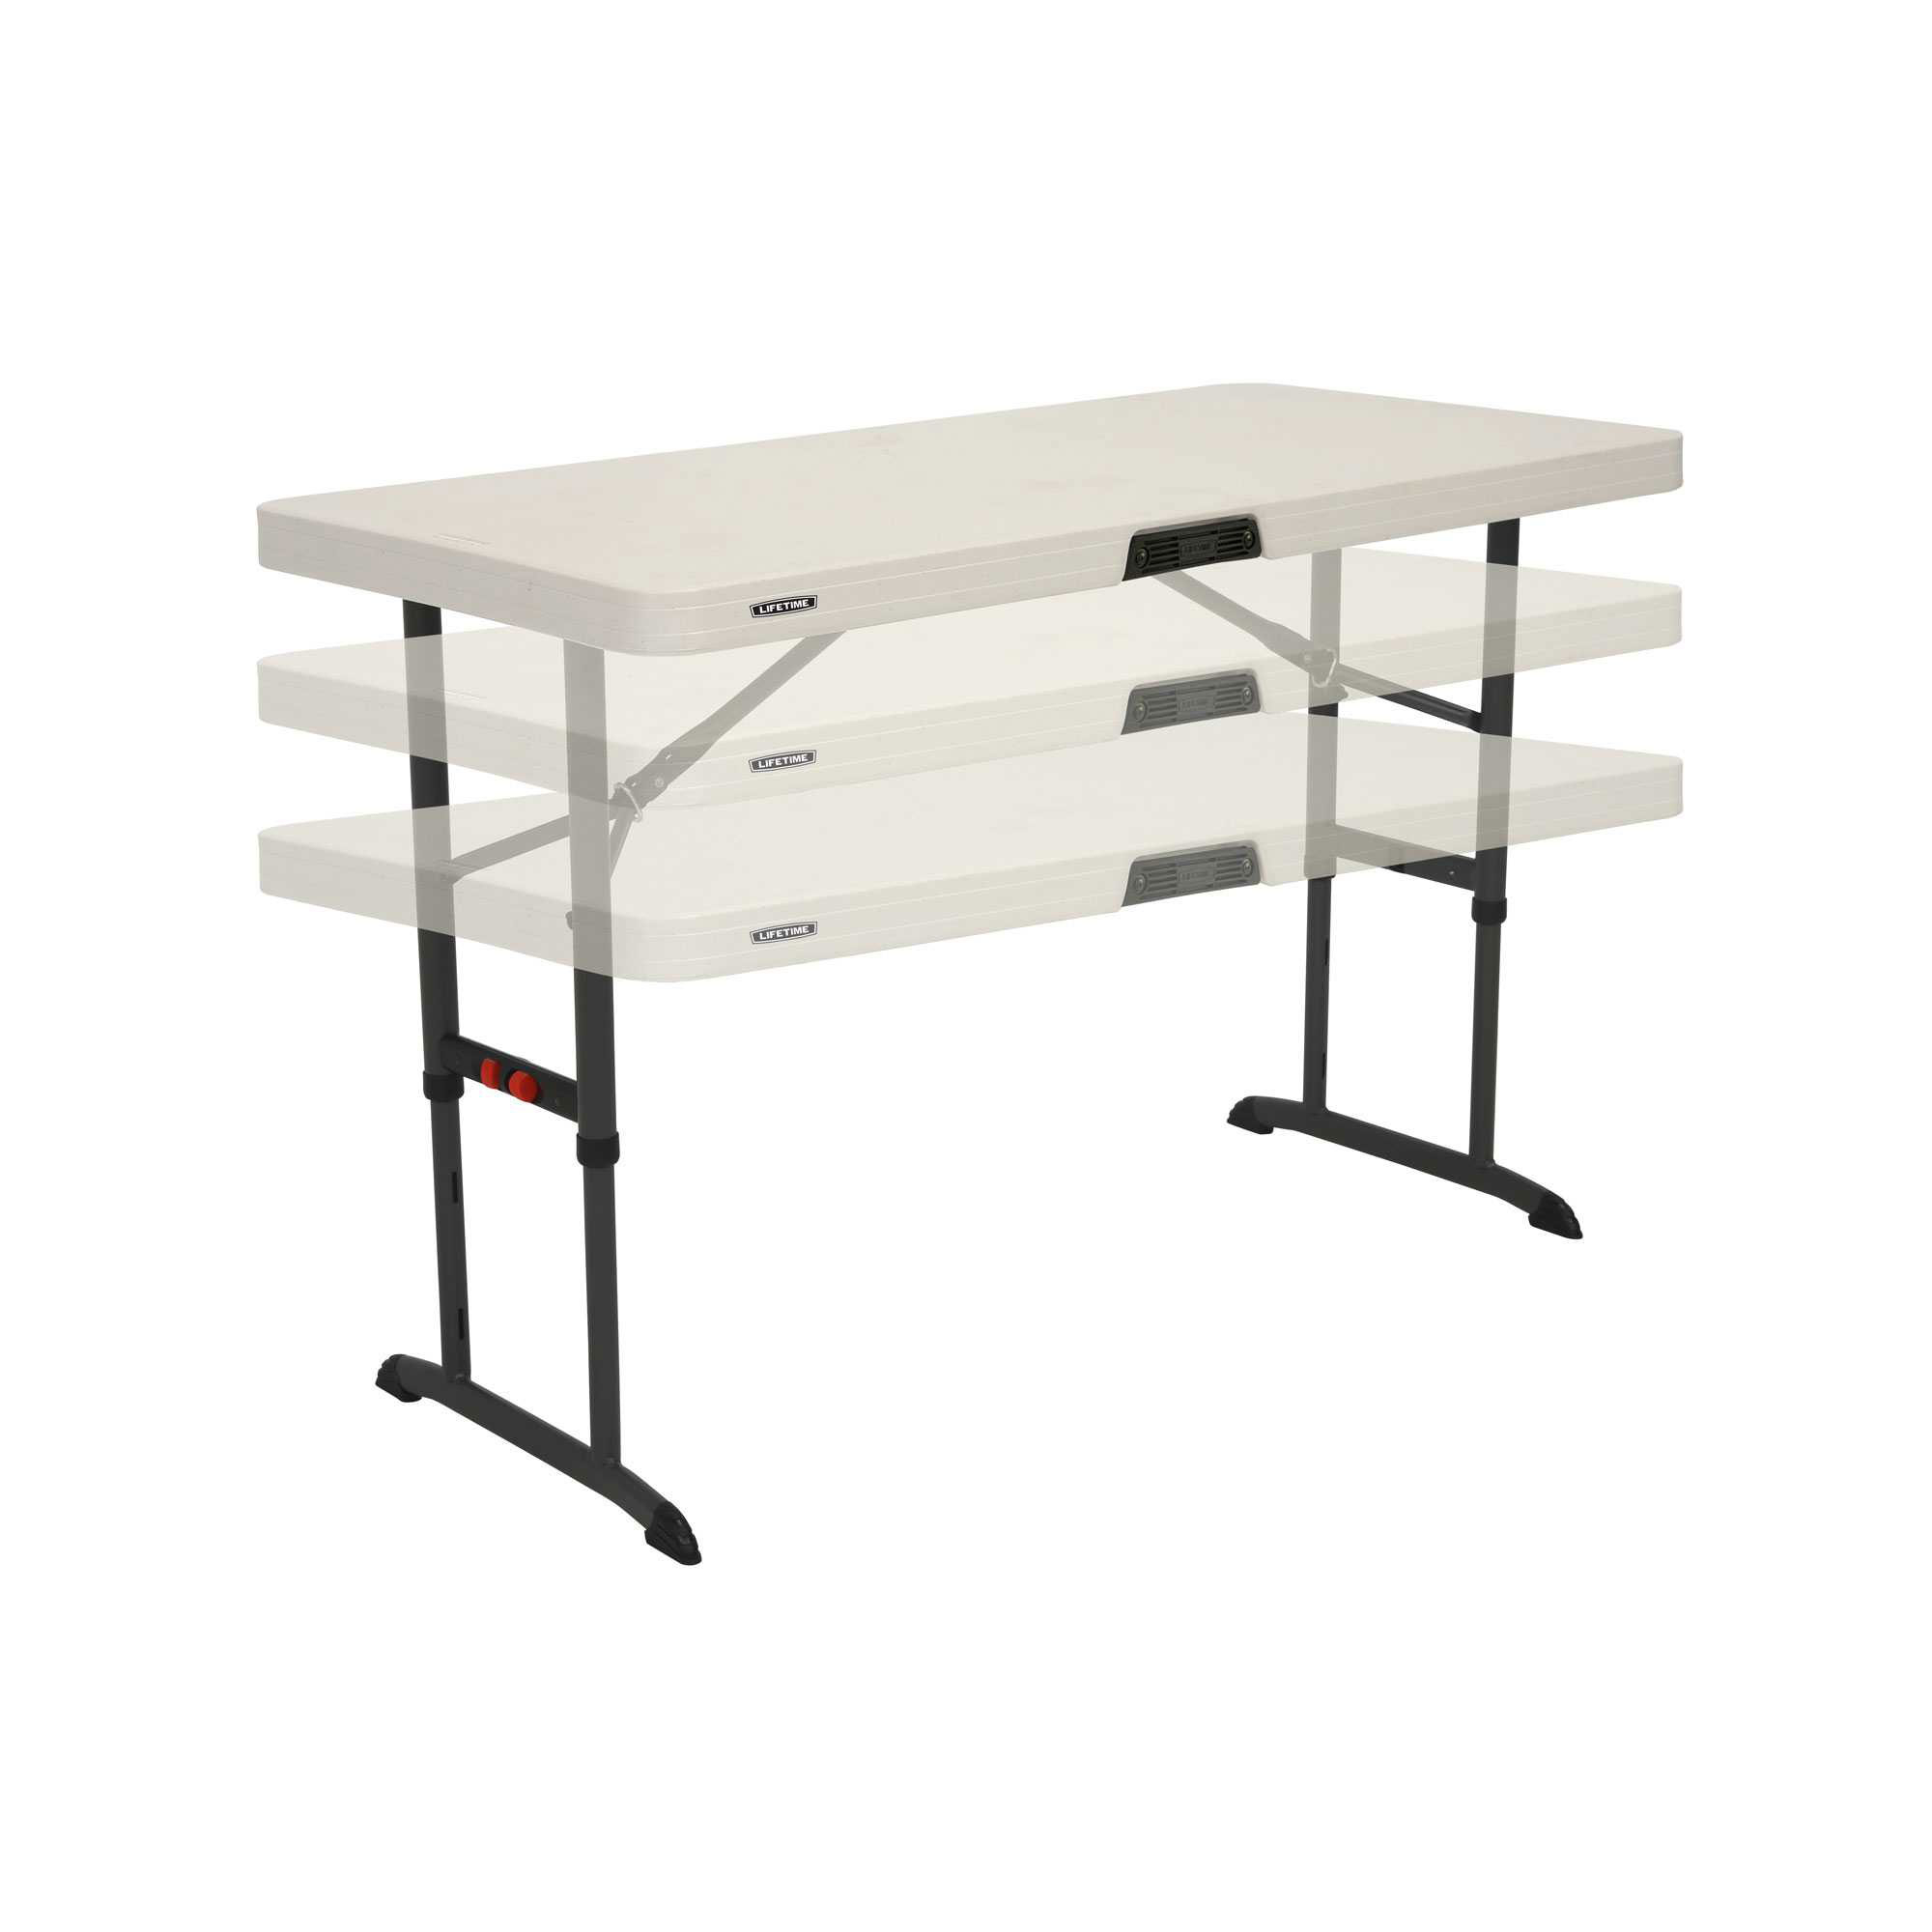 4 Foot Commercial Adjustable Folding Table Almond Lifetime 80387 80370 Within Measurements 2000 X 2000 